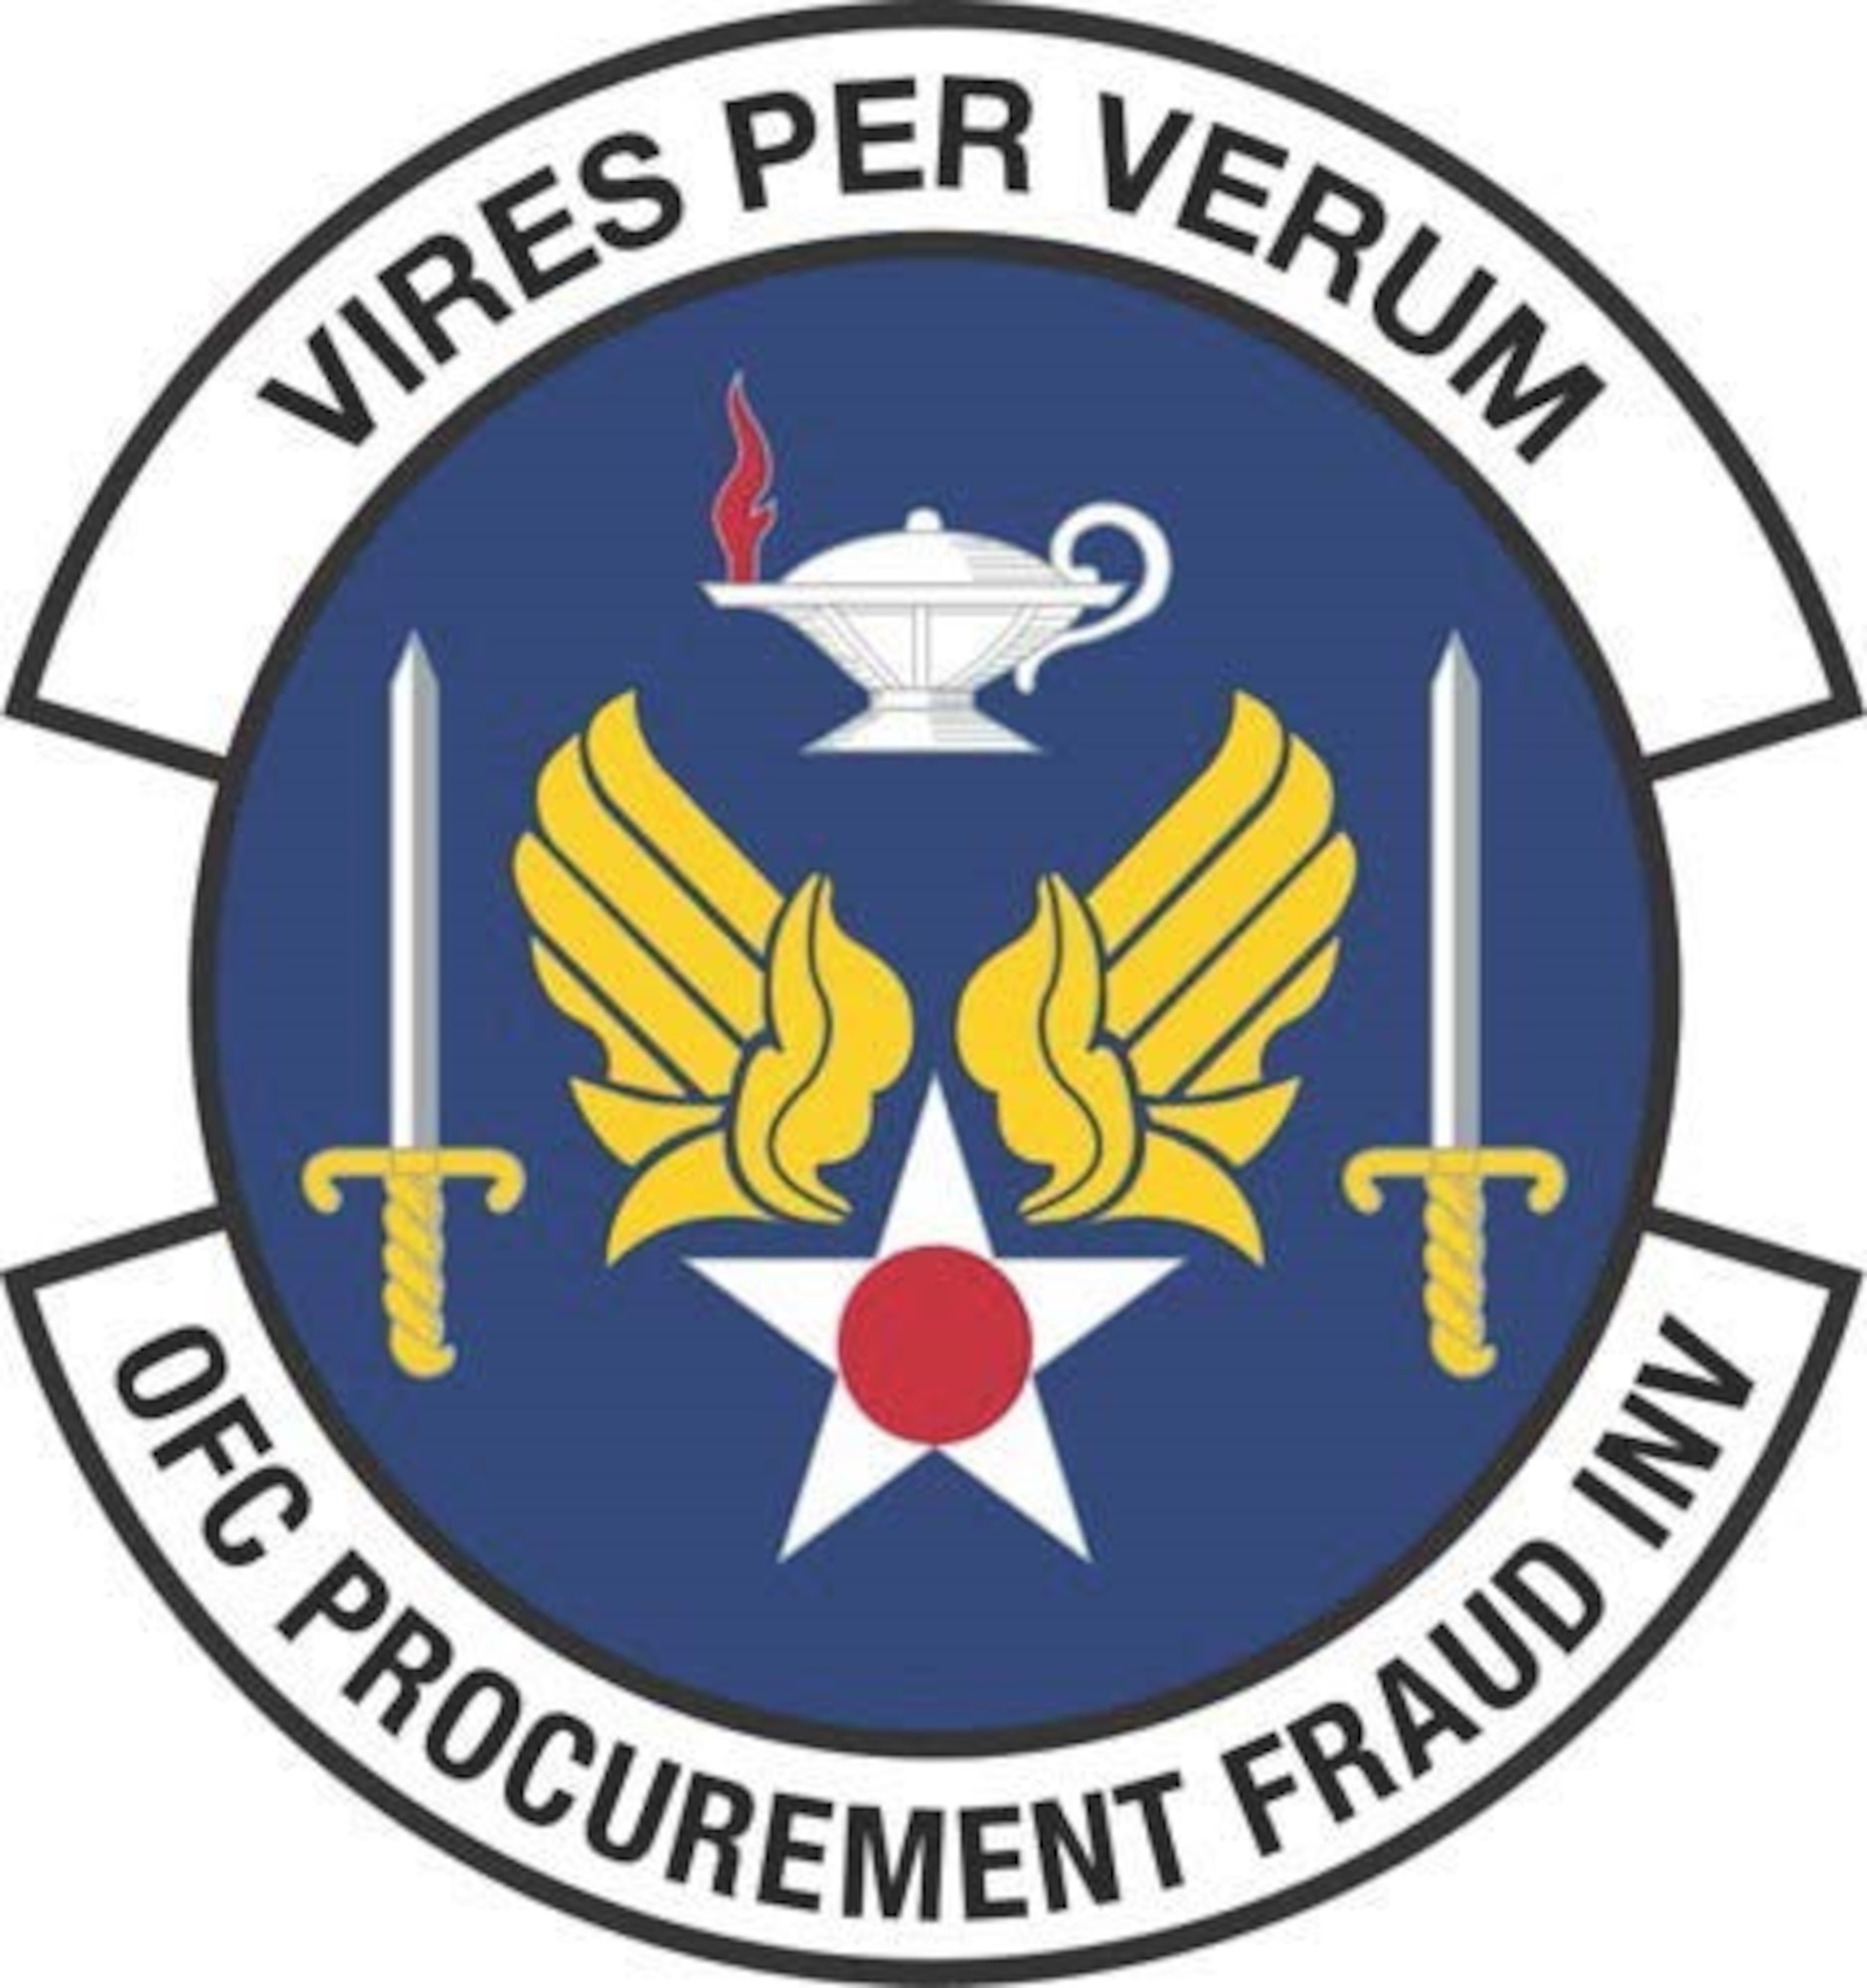 In 2013, these types of fraud investigations and operations led to the creation of OSI's Office of Procurement Fraud Investigations whose emblem is pictured. (U.S. Air Force graphic)